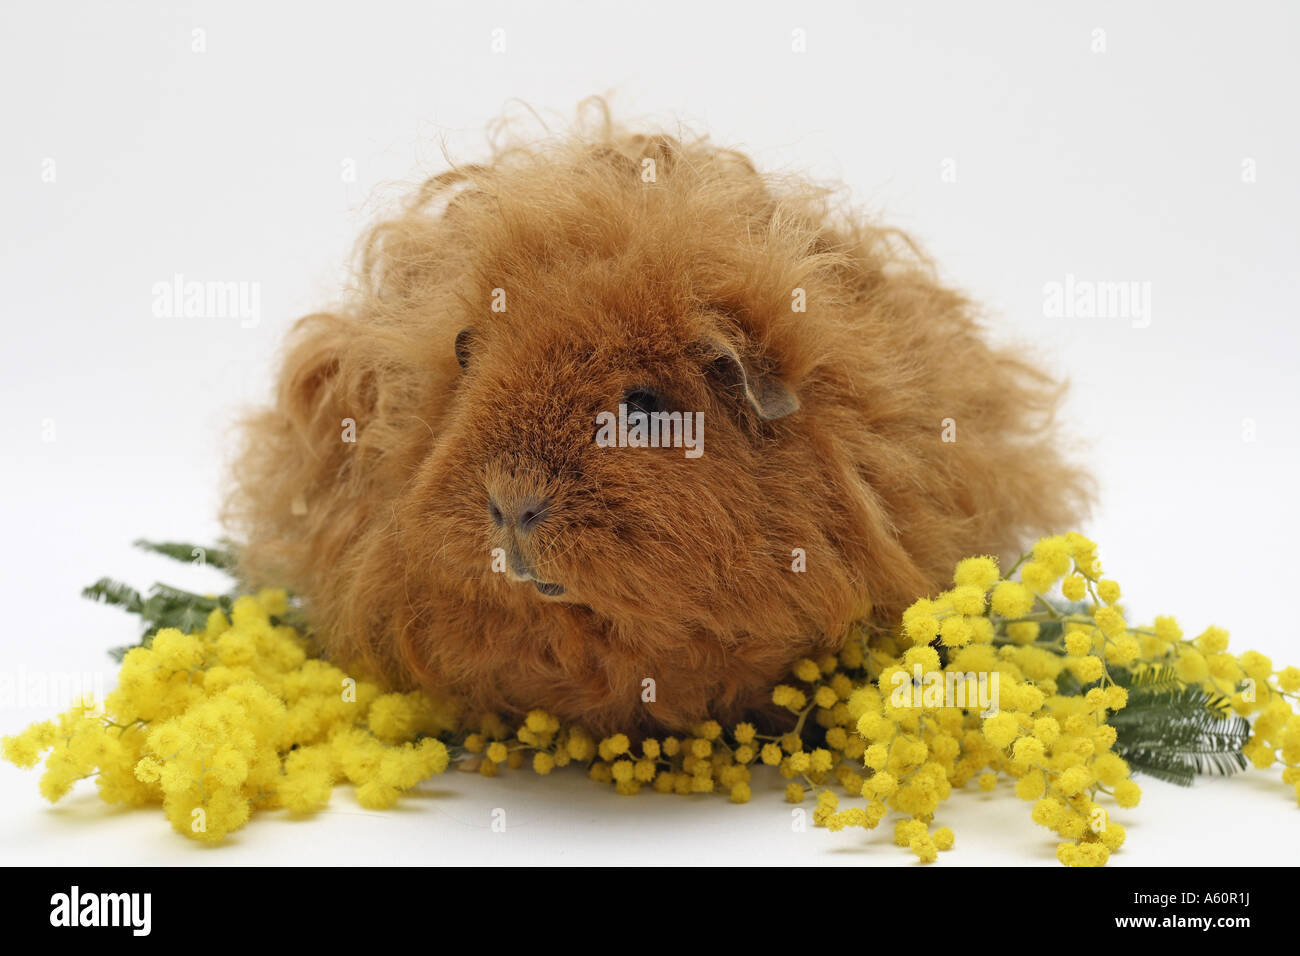 Texel Guinea pig (Cavia aperea f. porcellus), brown female with yellow mimosa blossoms Stock Photo